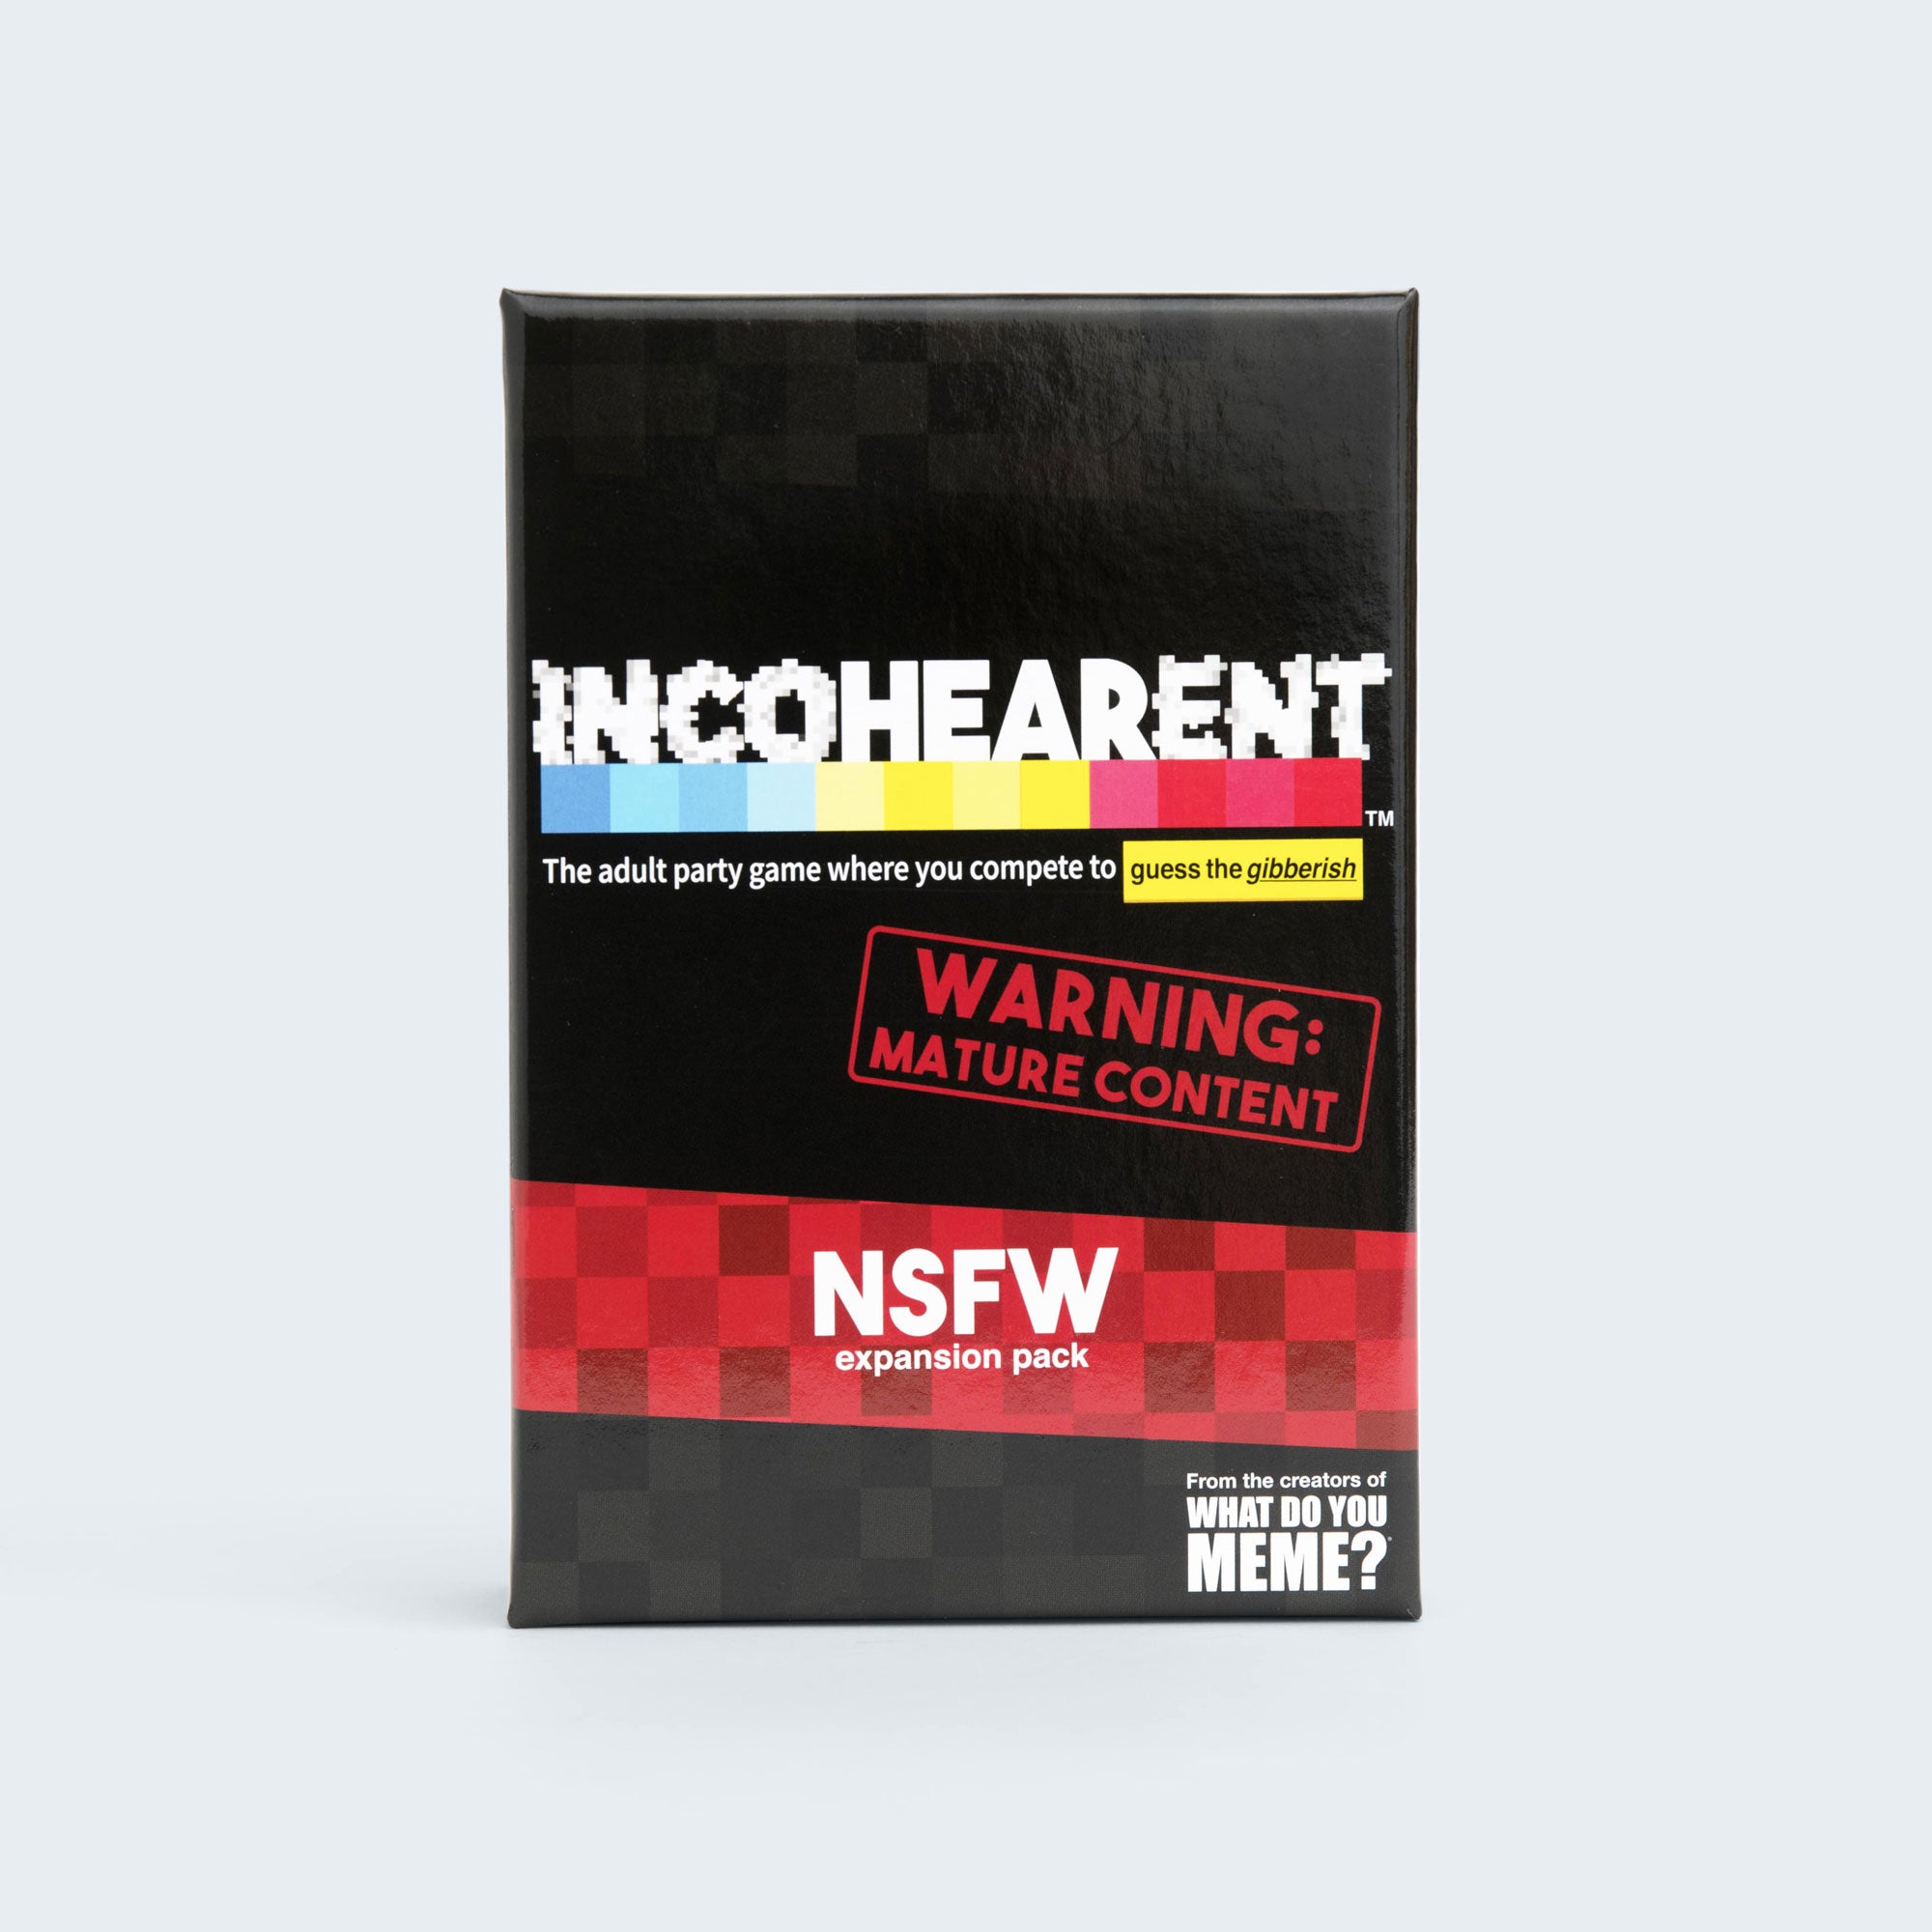 incohearent-nsfw-expansion-pack-game-box-and-game-play-03-what-do-you-meme-by-relatable